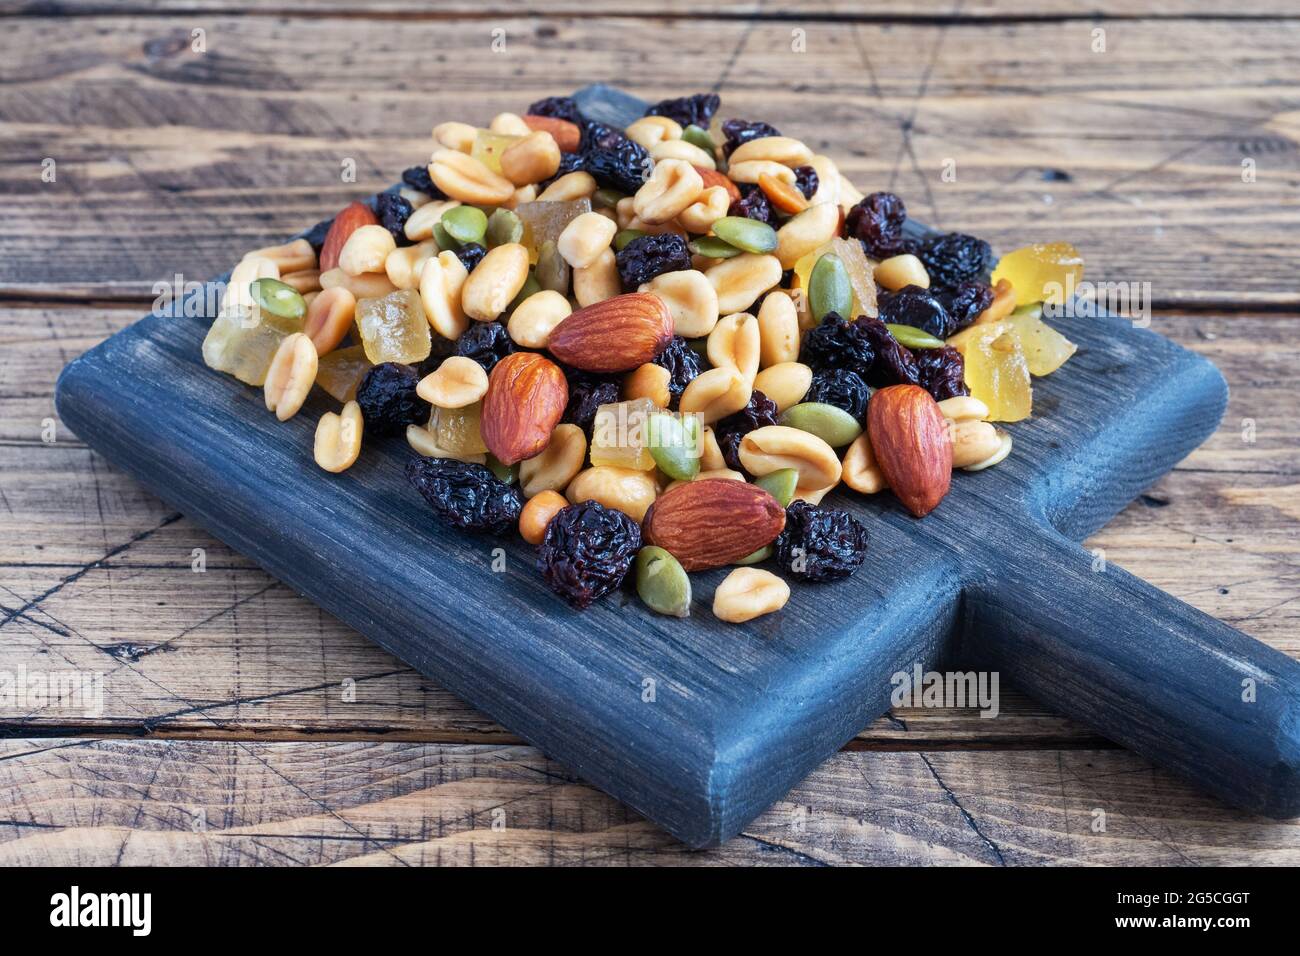 A mixture of nuts and dried fruits on a wooden chopping board, rustic background. Concept of healthy food Stock Photo